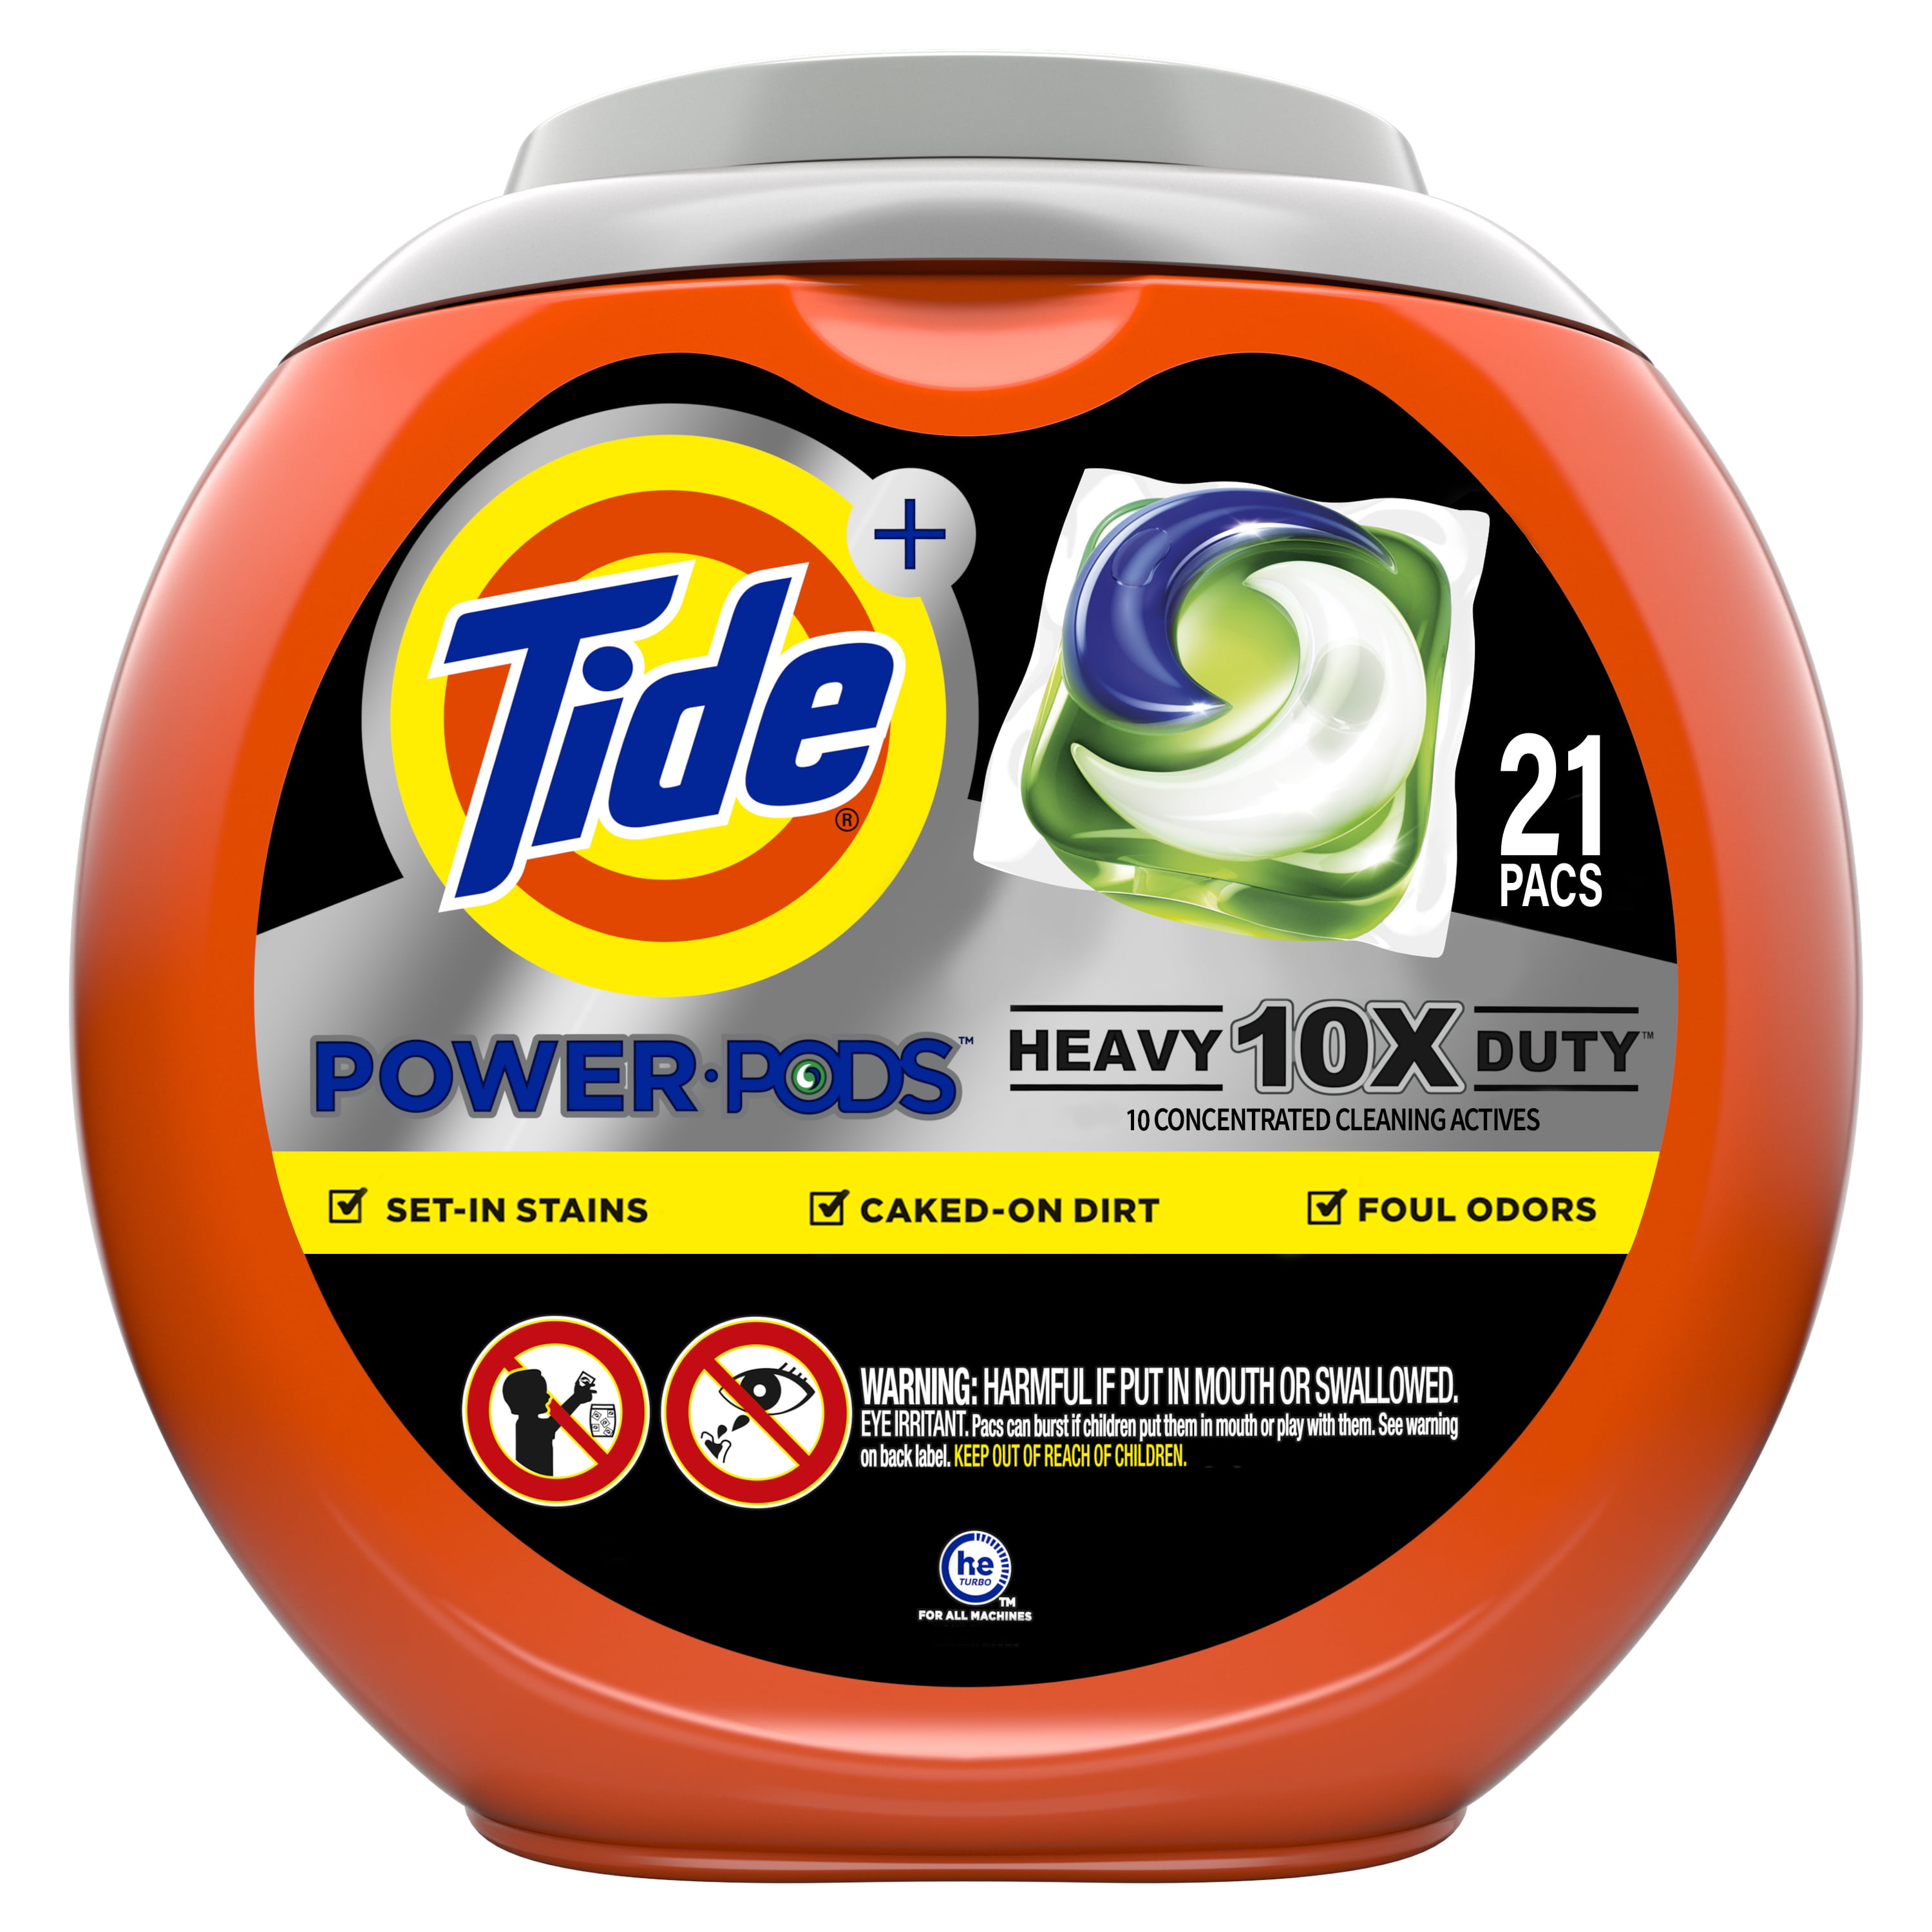 Tide Power Pods Heavy Duty 21 Ct, Laundry Detergent Pacs (Designed for